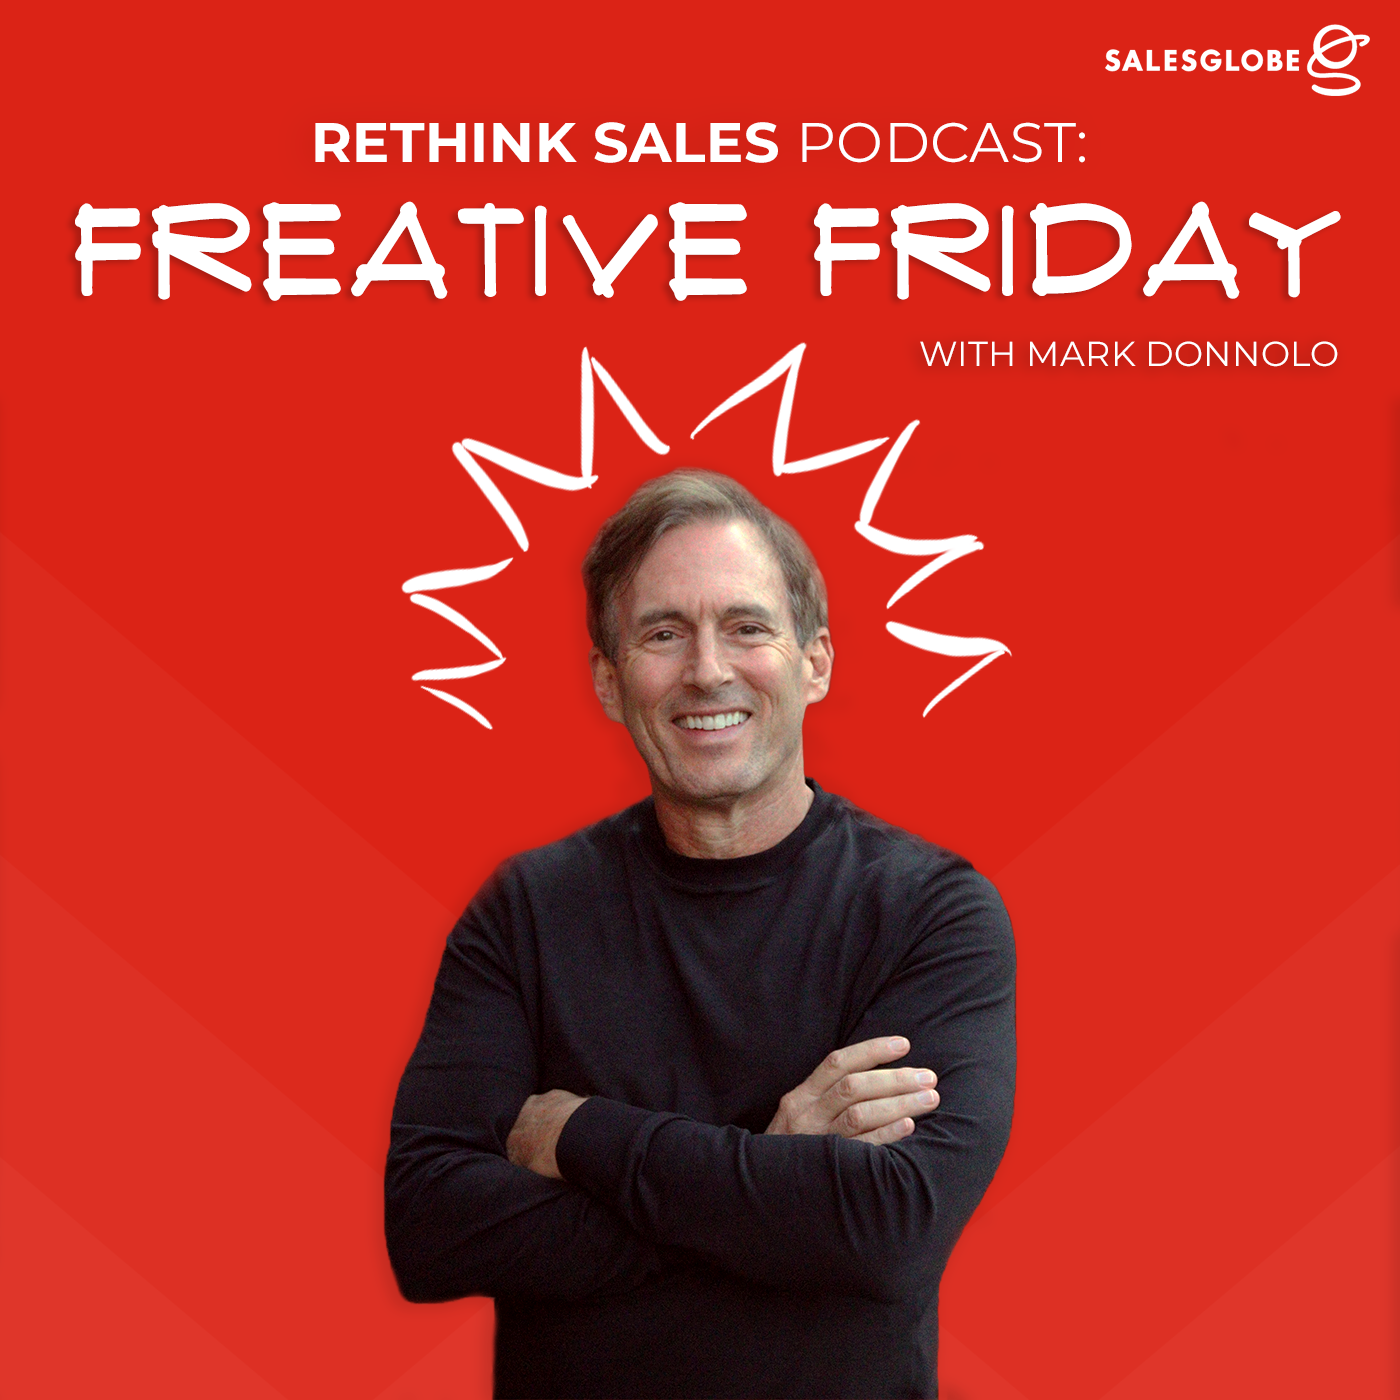 91: Freative Friday - The Art of Change Part 1